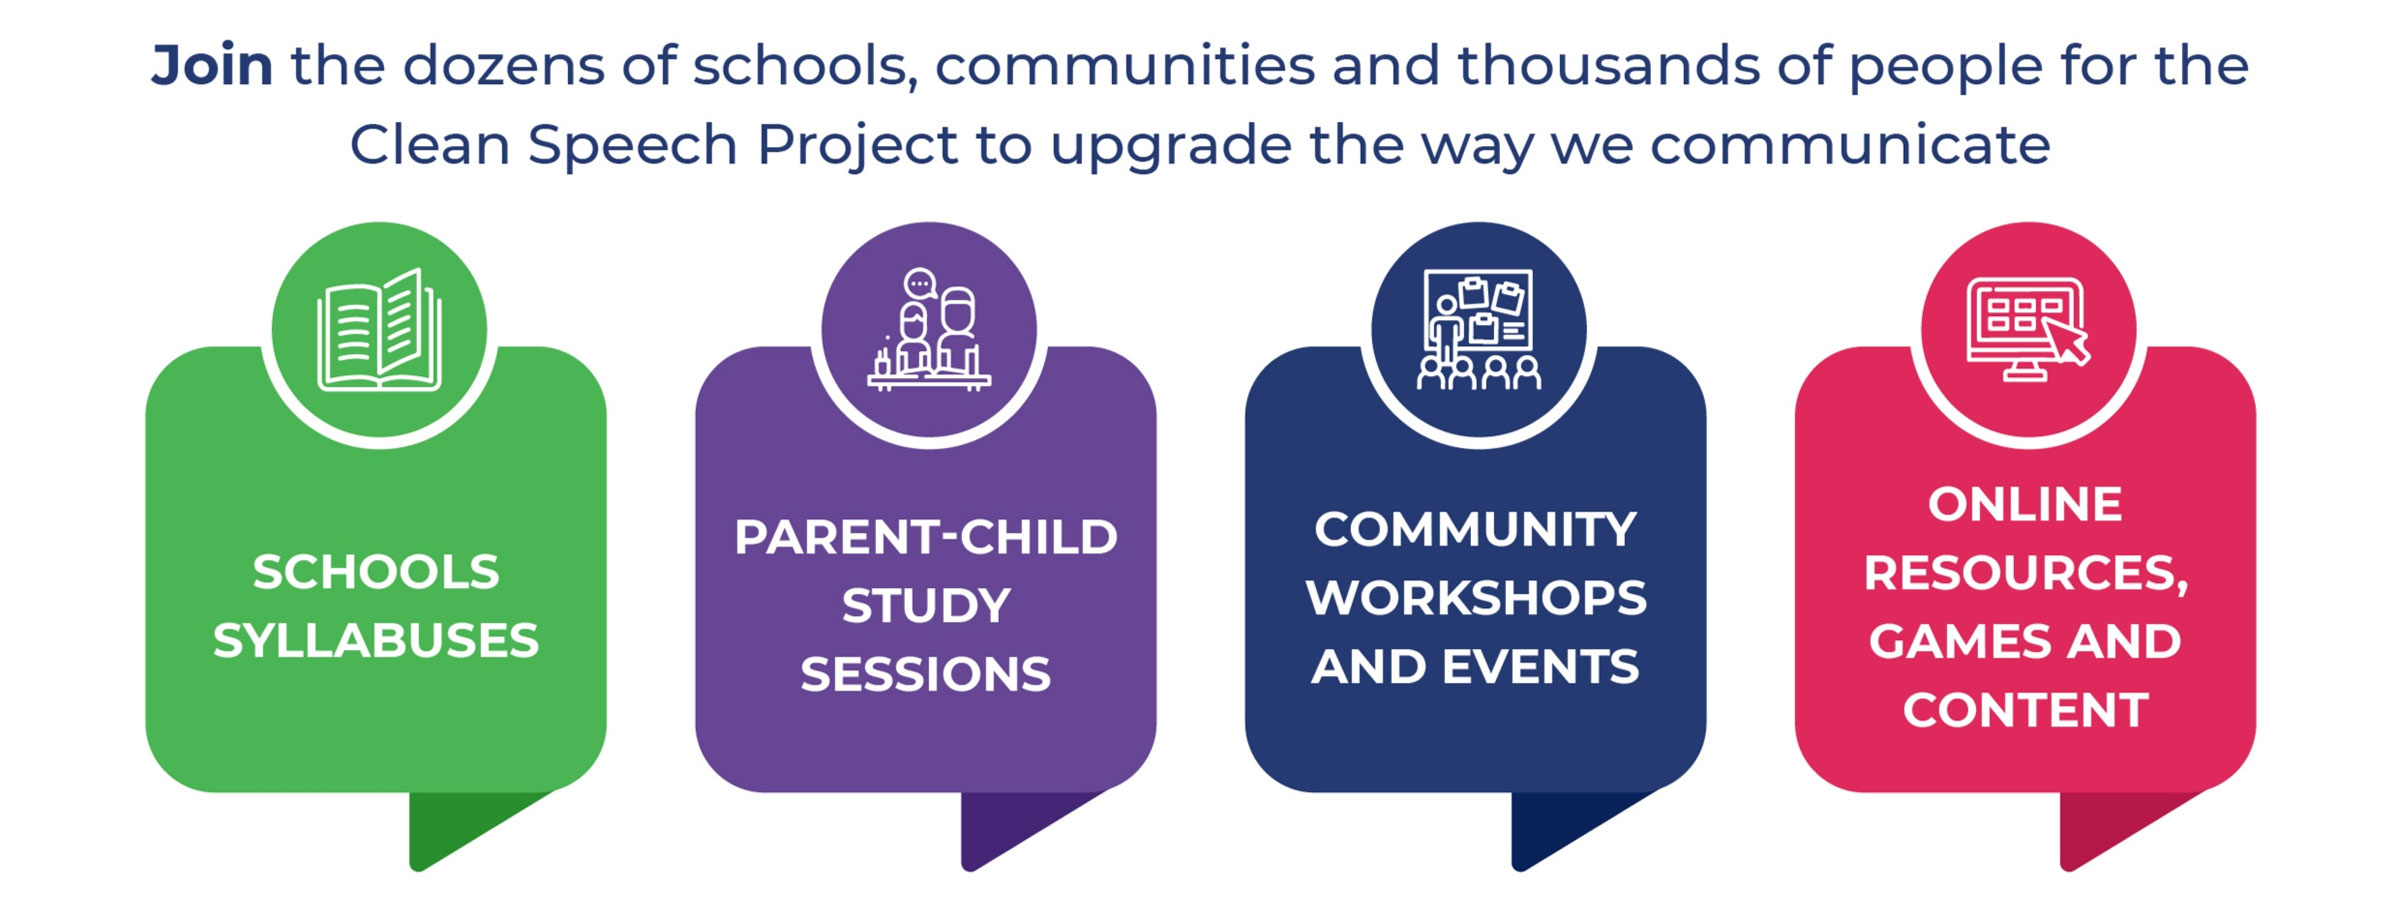 Join the dozens of schools, comunities and thousands of people for the Clean Speech Project to upgrade the way we communicate - School syallbuses, Parent-child study sessions, Community workshops and events, Online resources, games and content